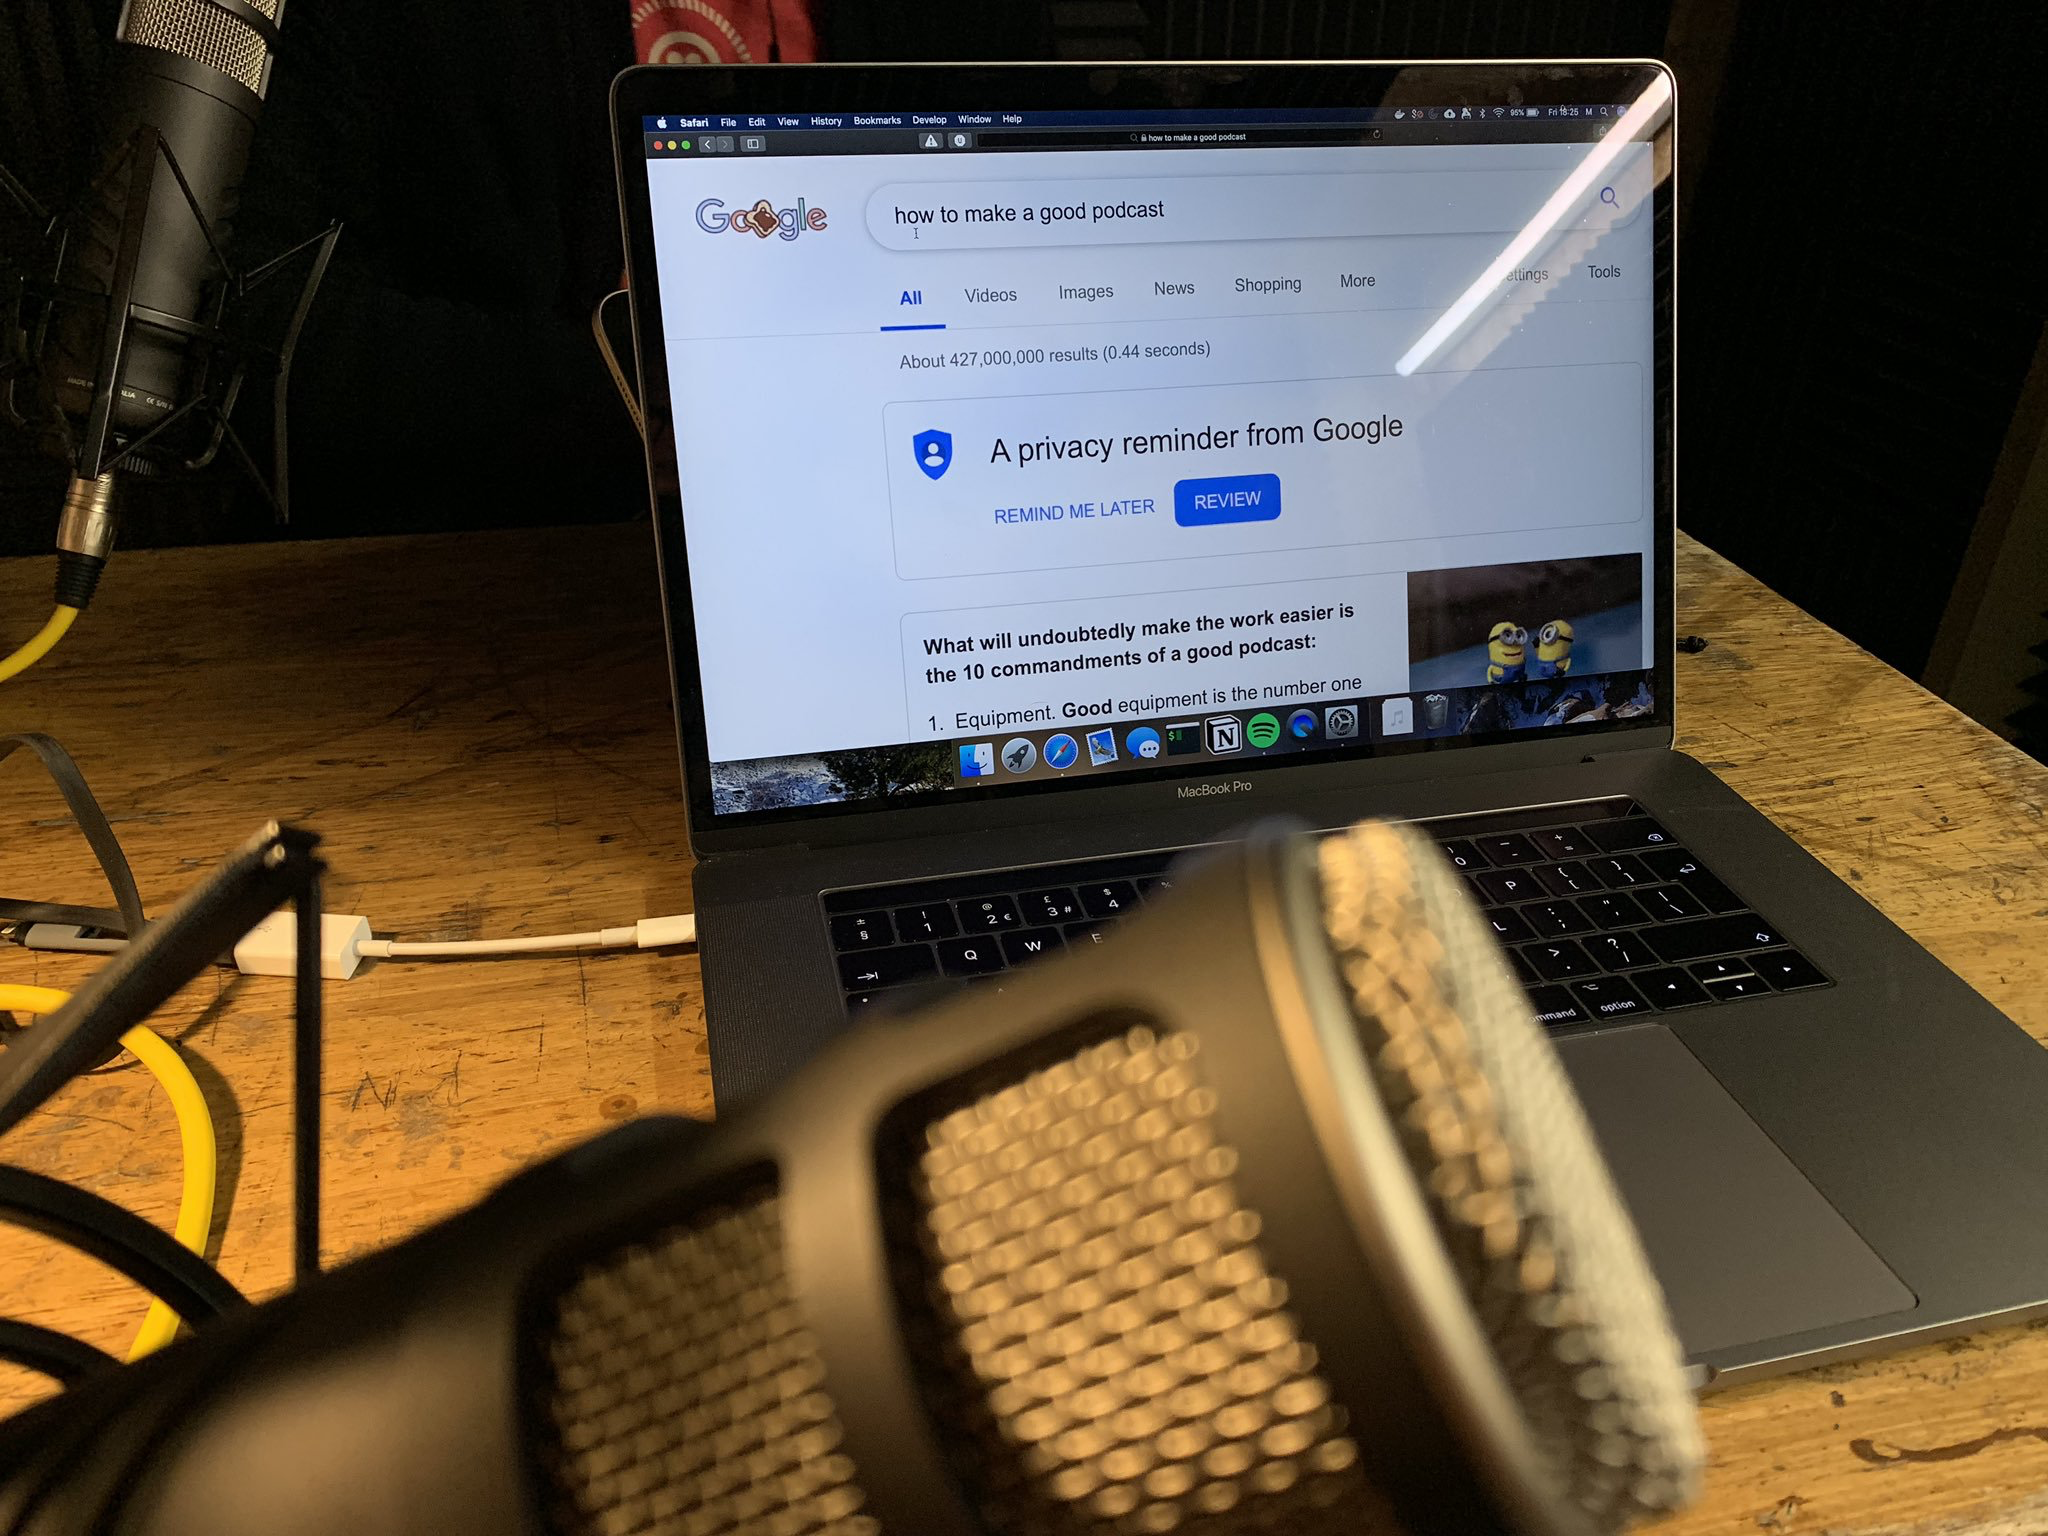 A photo of our laptop in the recording studio, and a microphone in the foreground. The laptop has a webpage up that says, "how to make a good podcast."